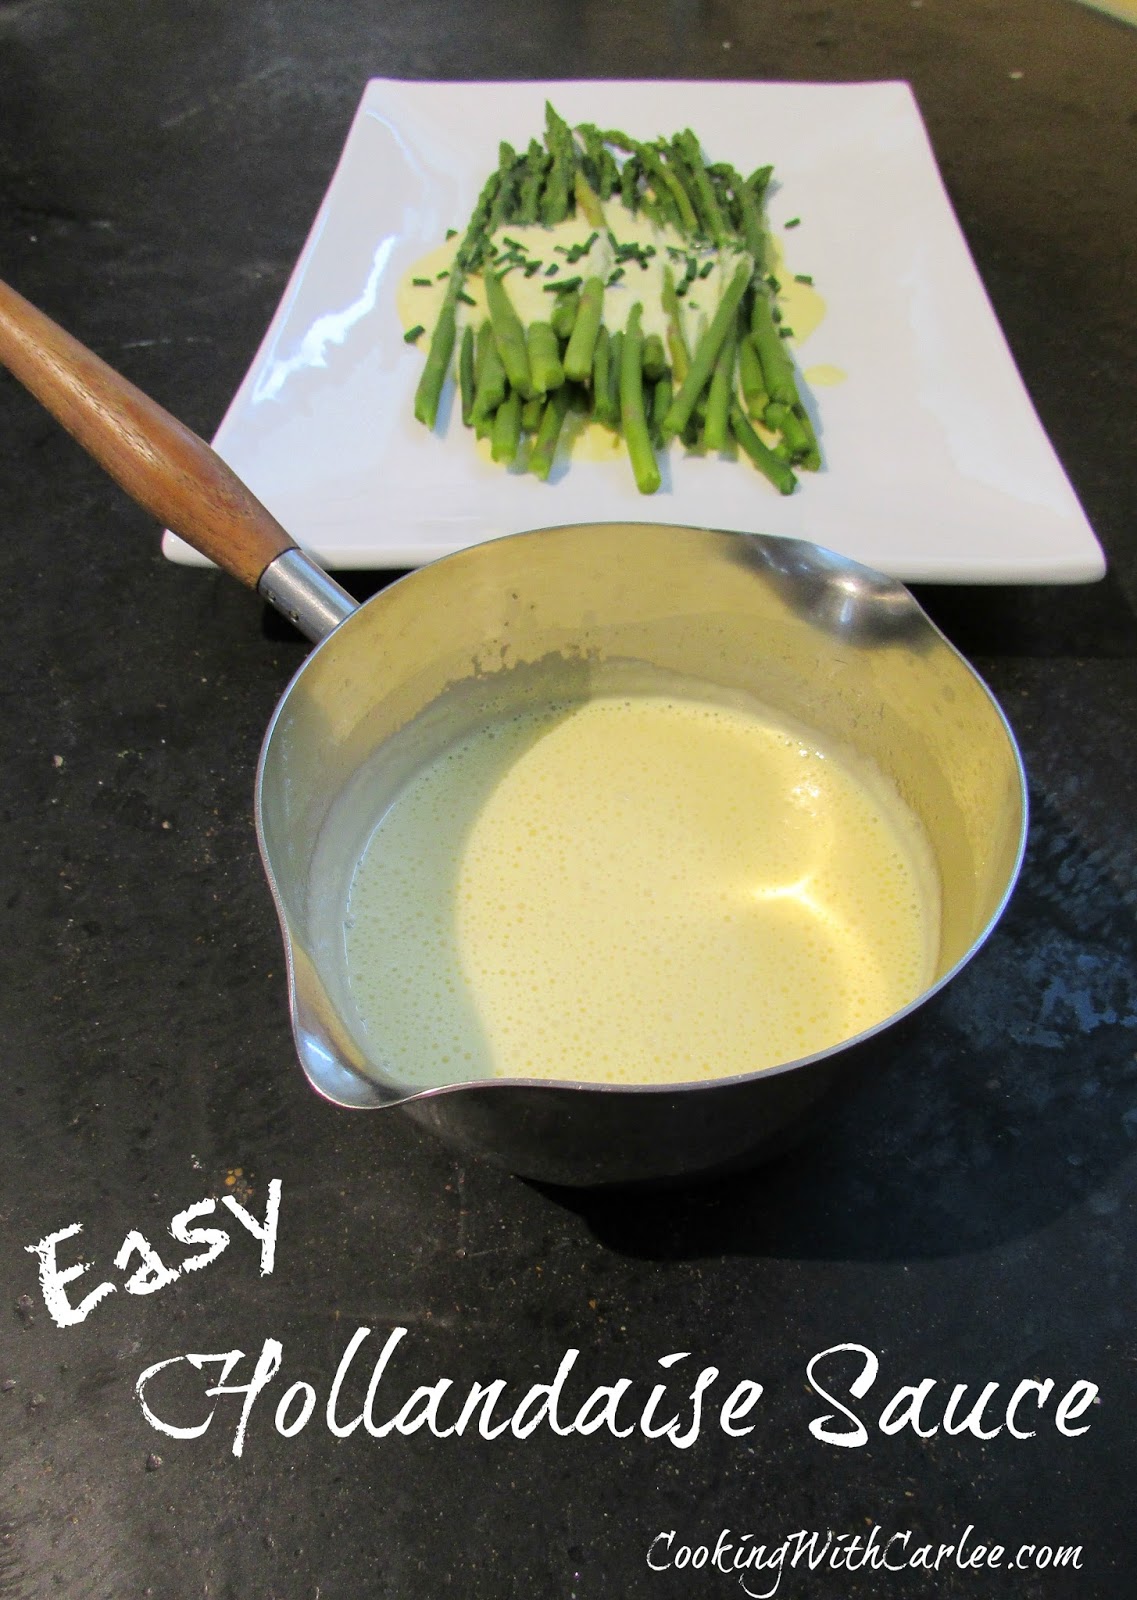 Cooking With Carlee: Easy Hollandaise Sauce